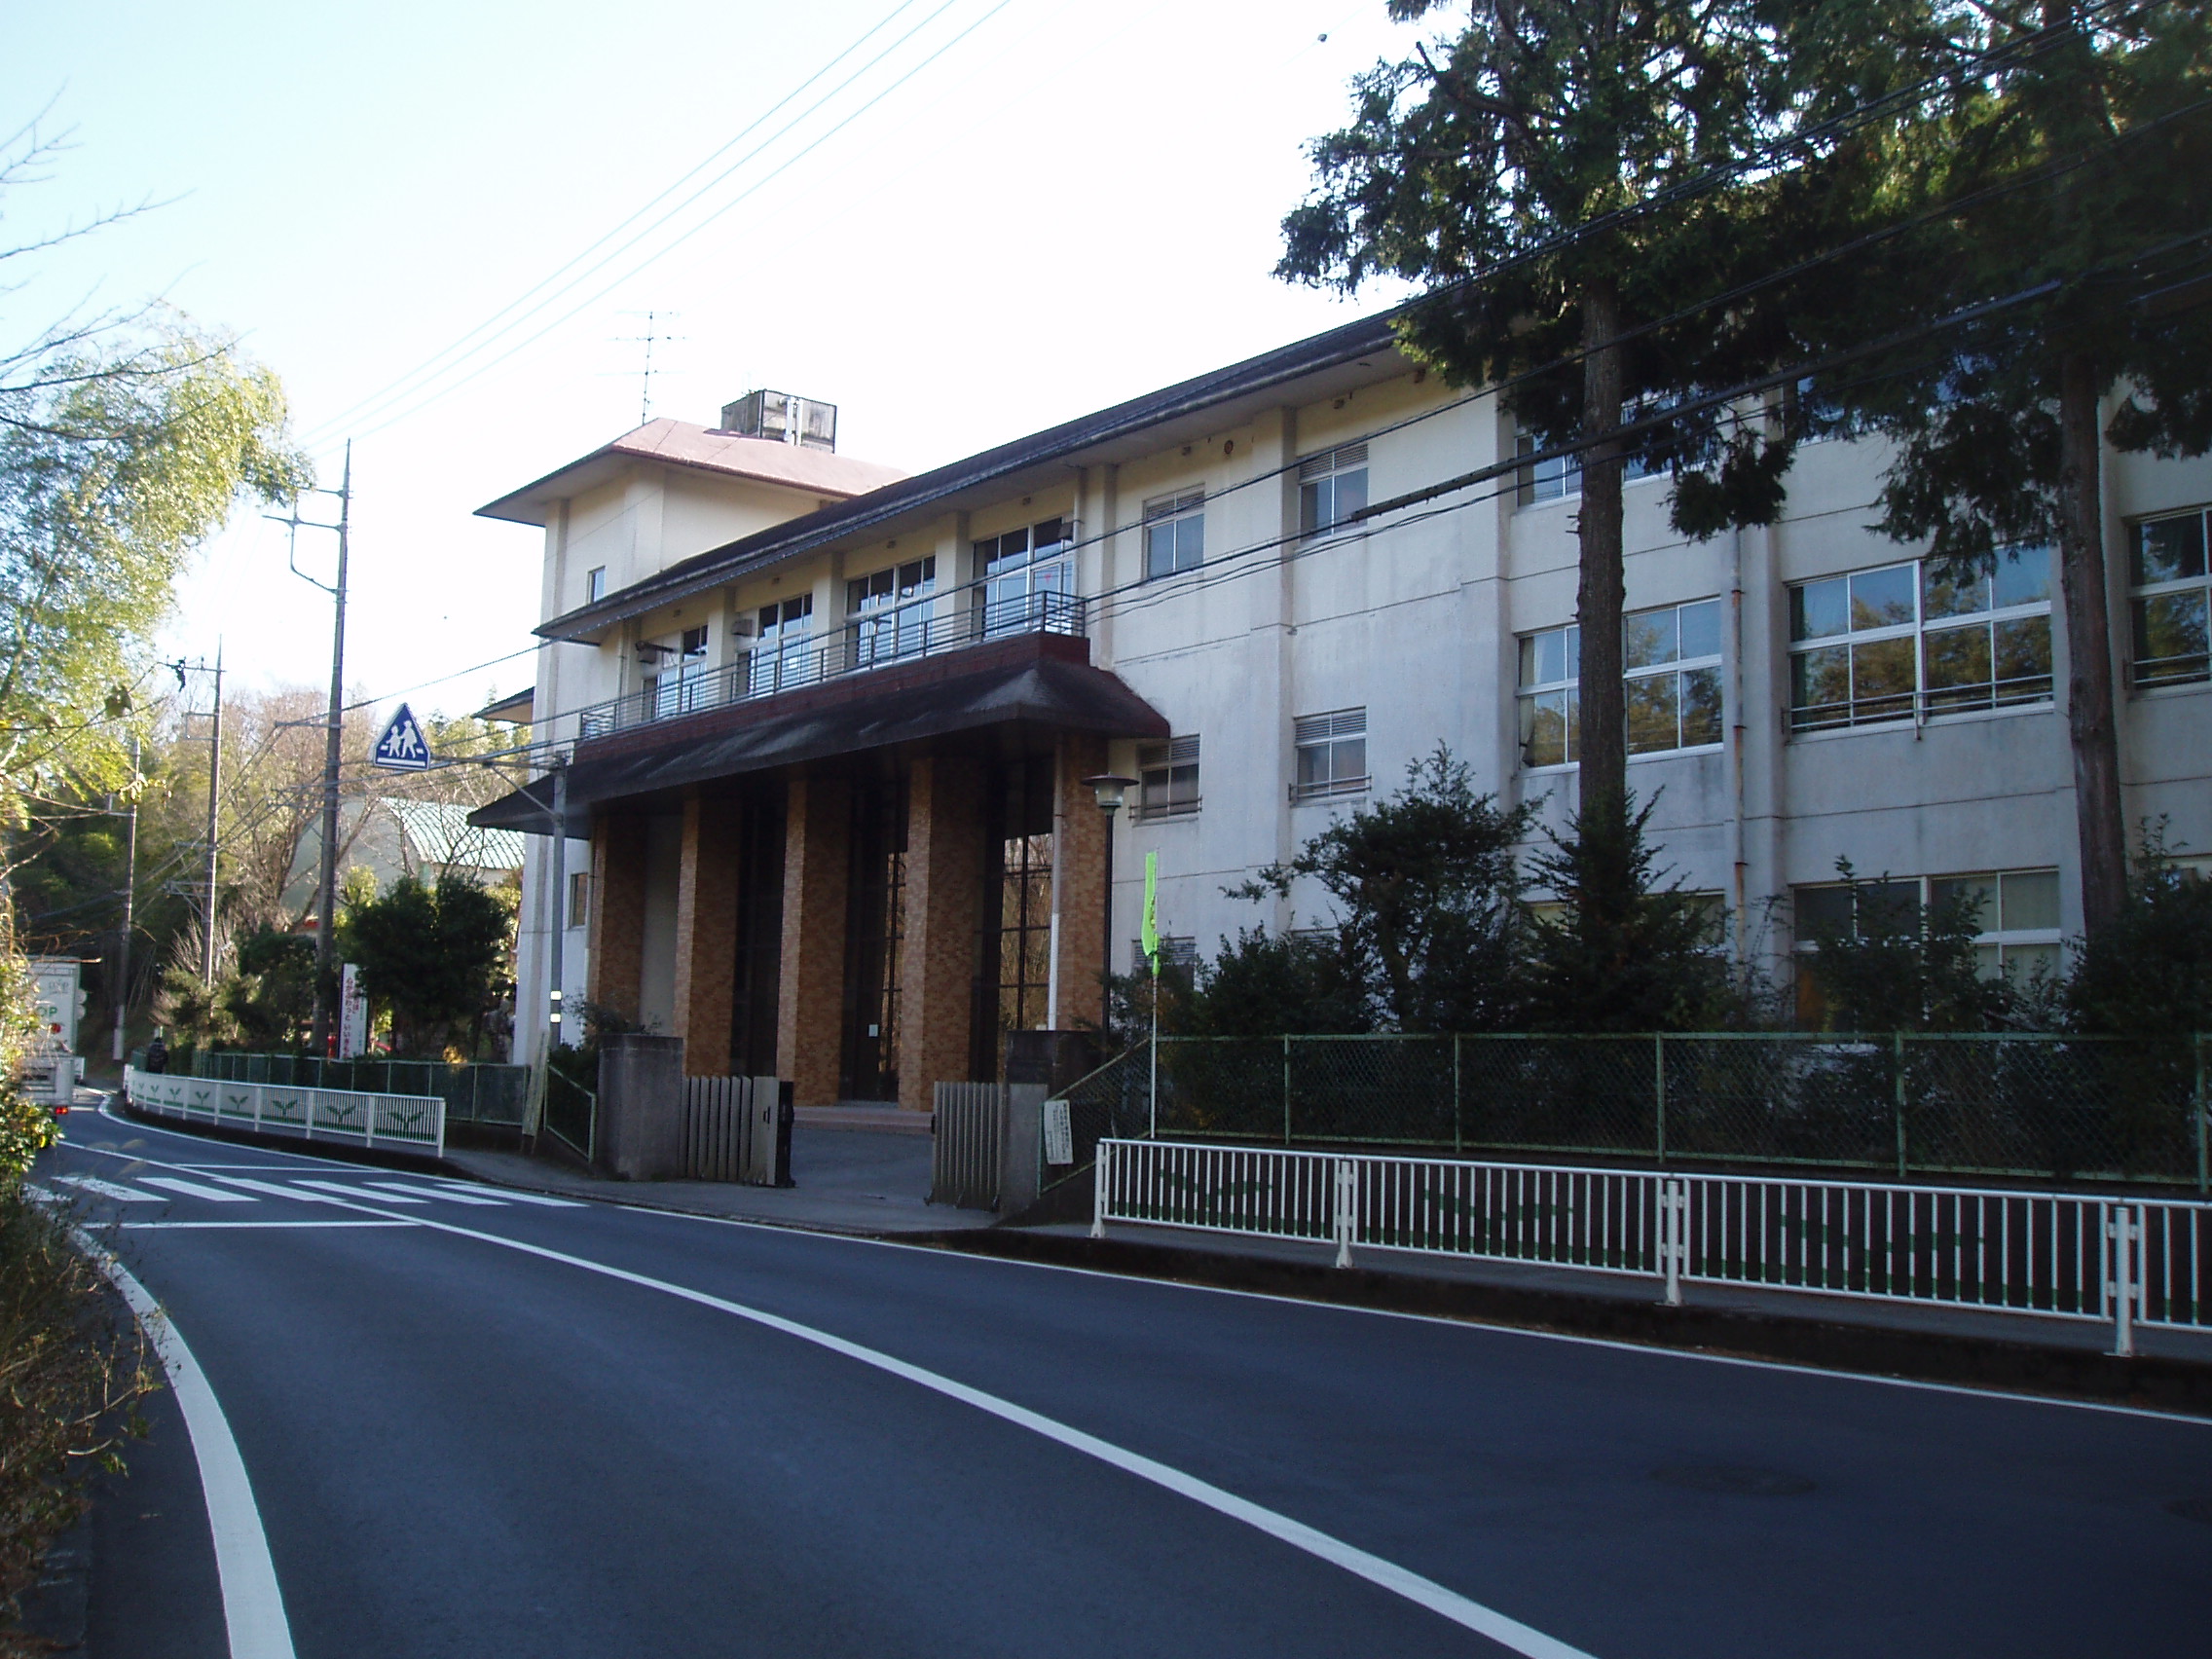 Primary school. 2139m to Ito City Oike elementary school (elementary school)